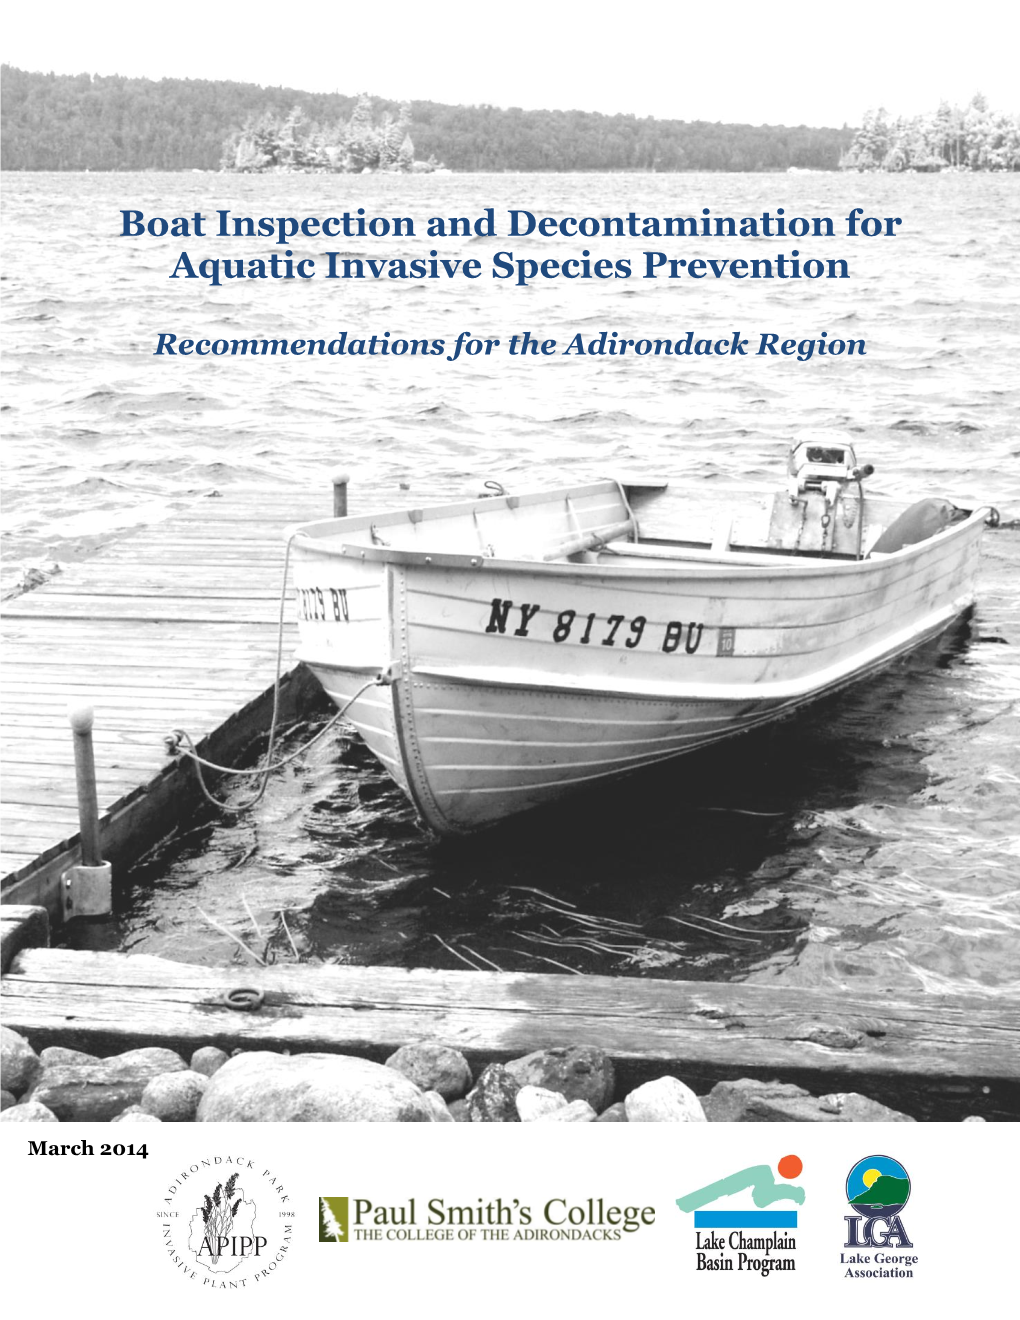 Boat Inspection and Decontamination for Aquatic Invasive Species Prevention